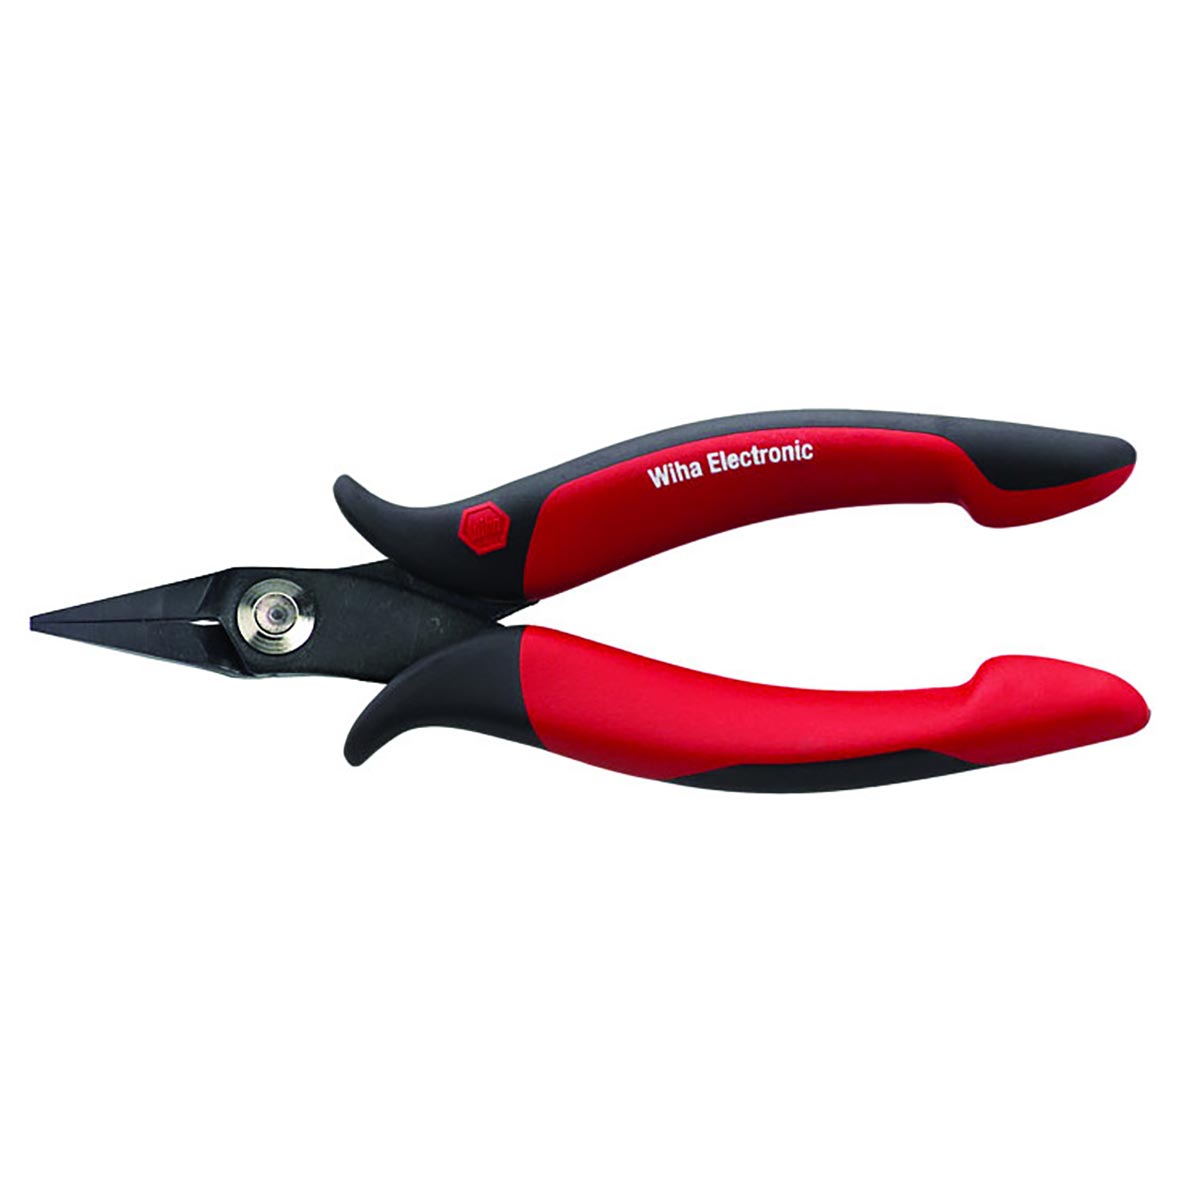 Wiha Precision Electronic Pointed Narrow Short Nose Pliers